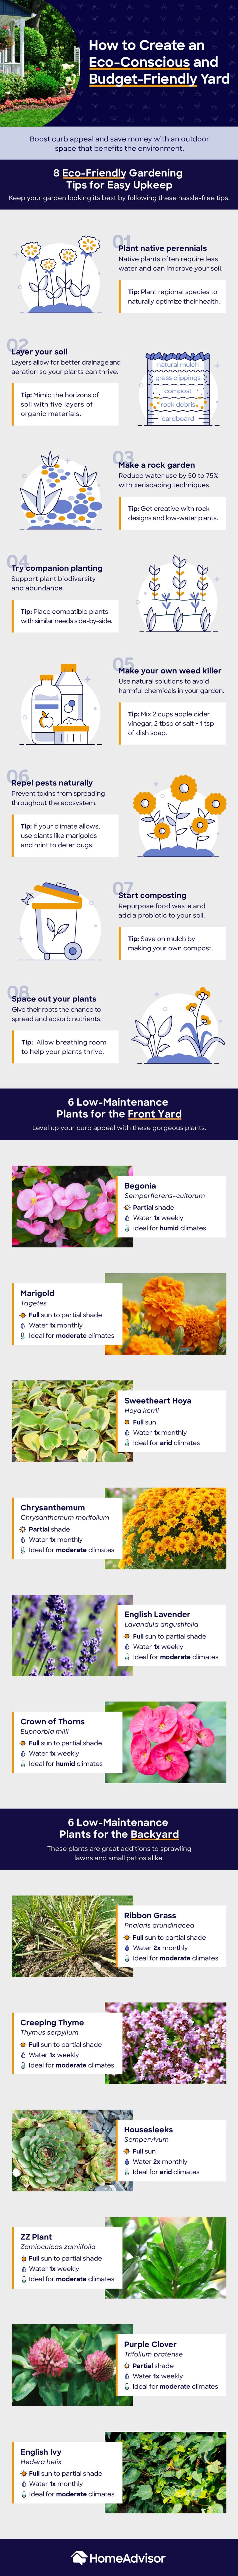 Infographic: Tips for an Eco-Friendly, Low-Maintenance Yard